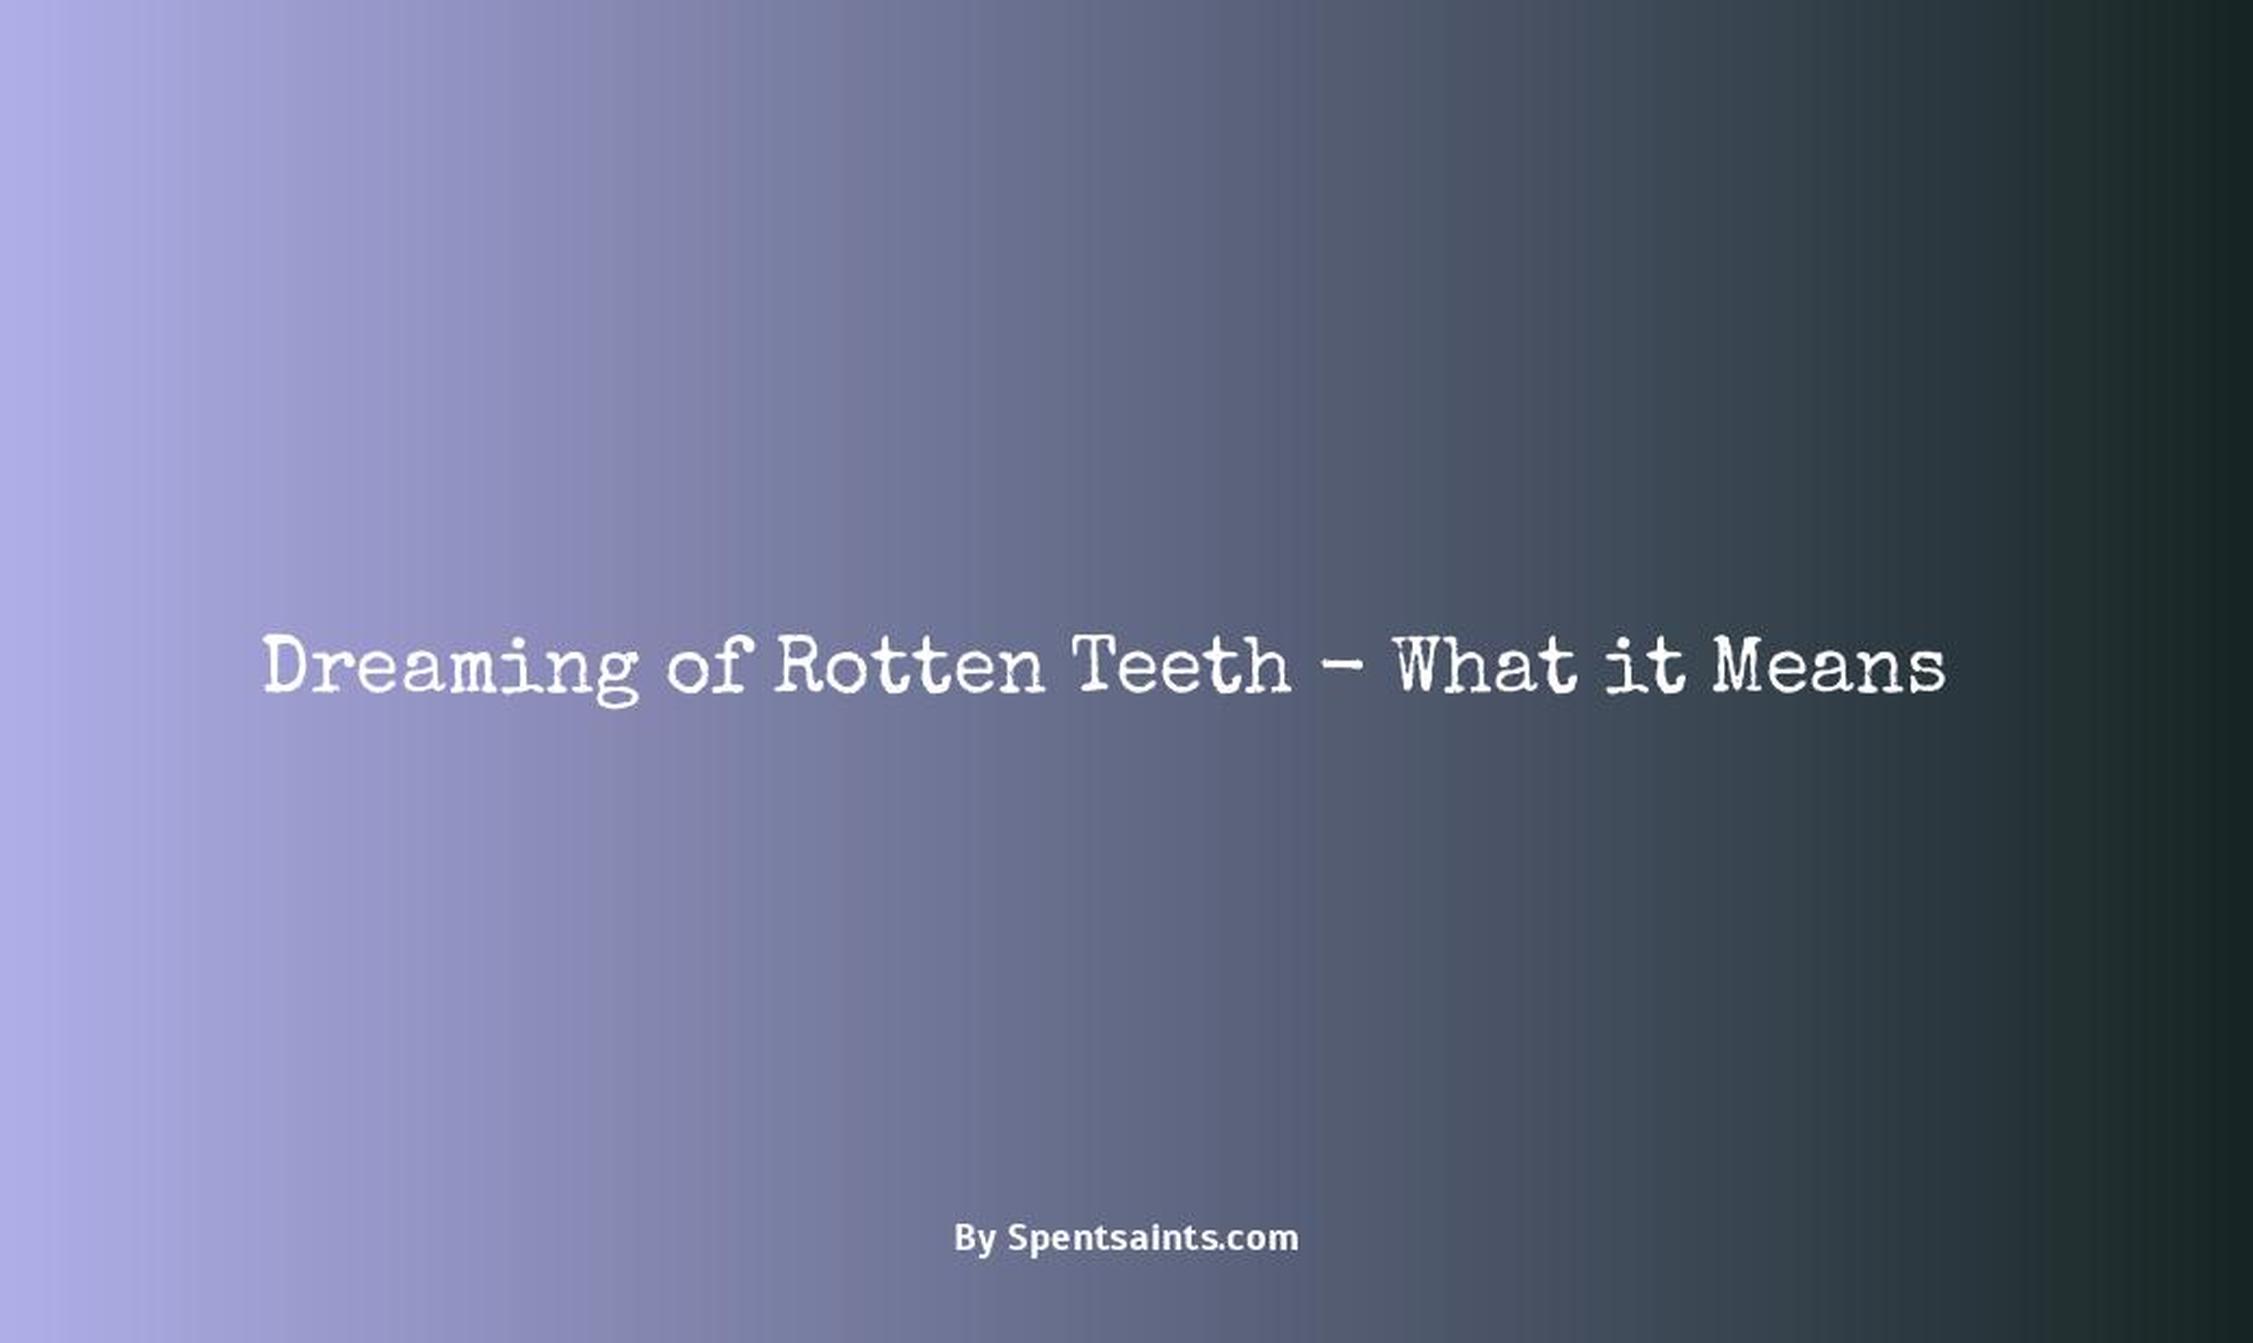 rotten teeth dream meaning